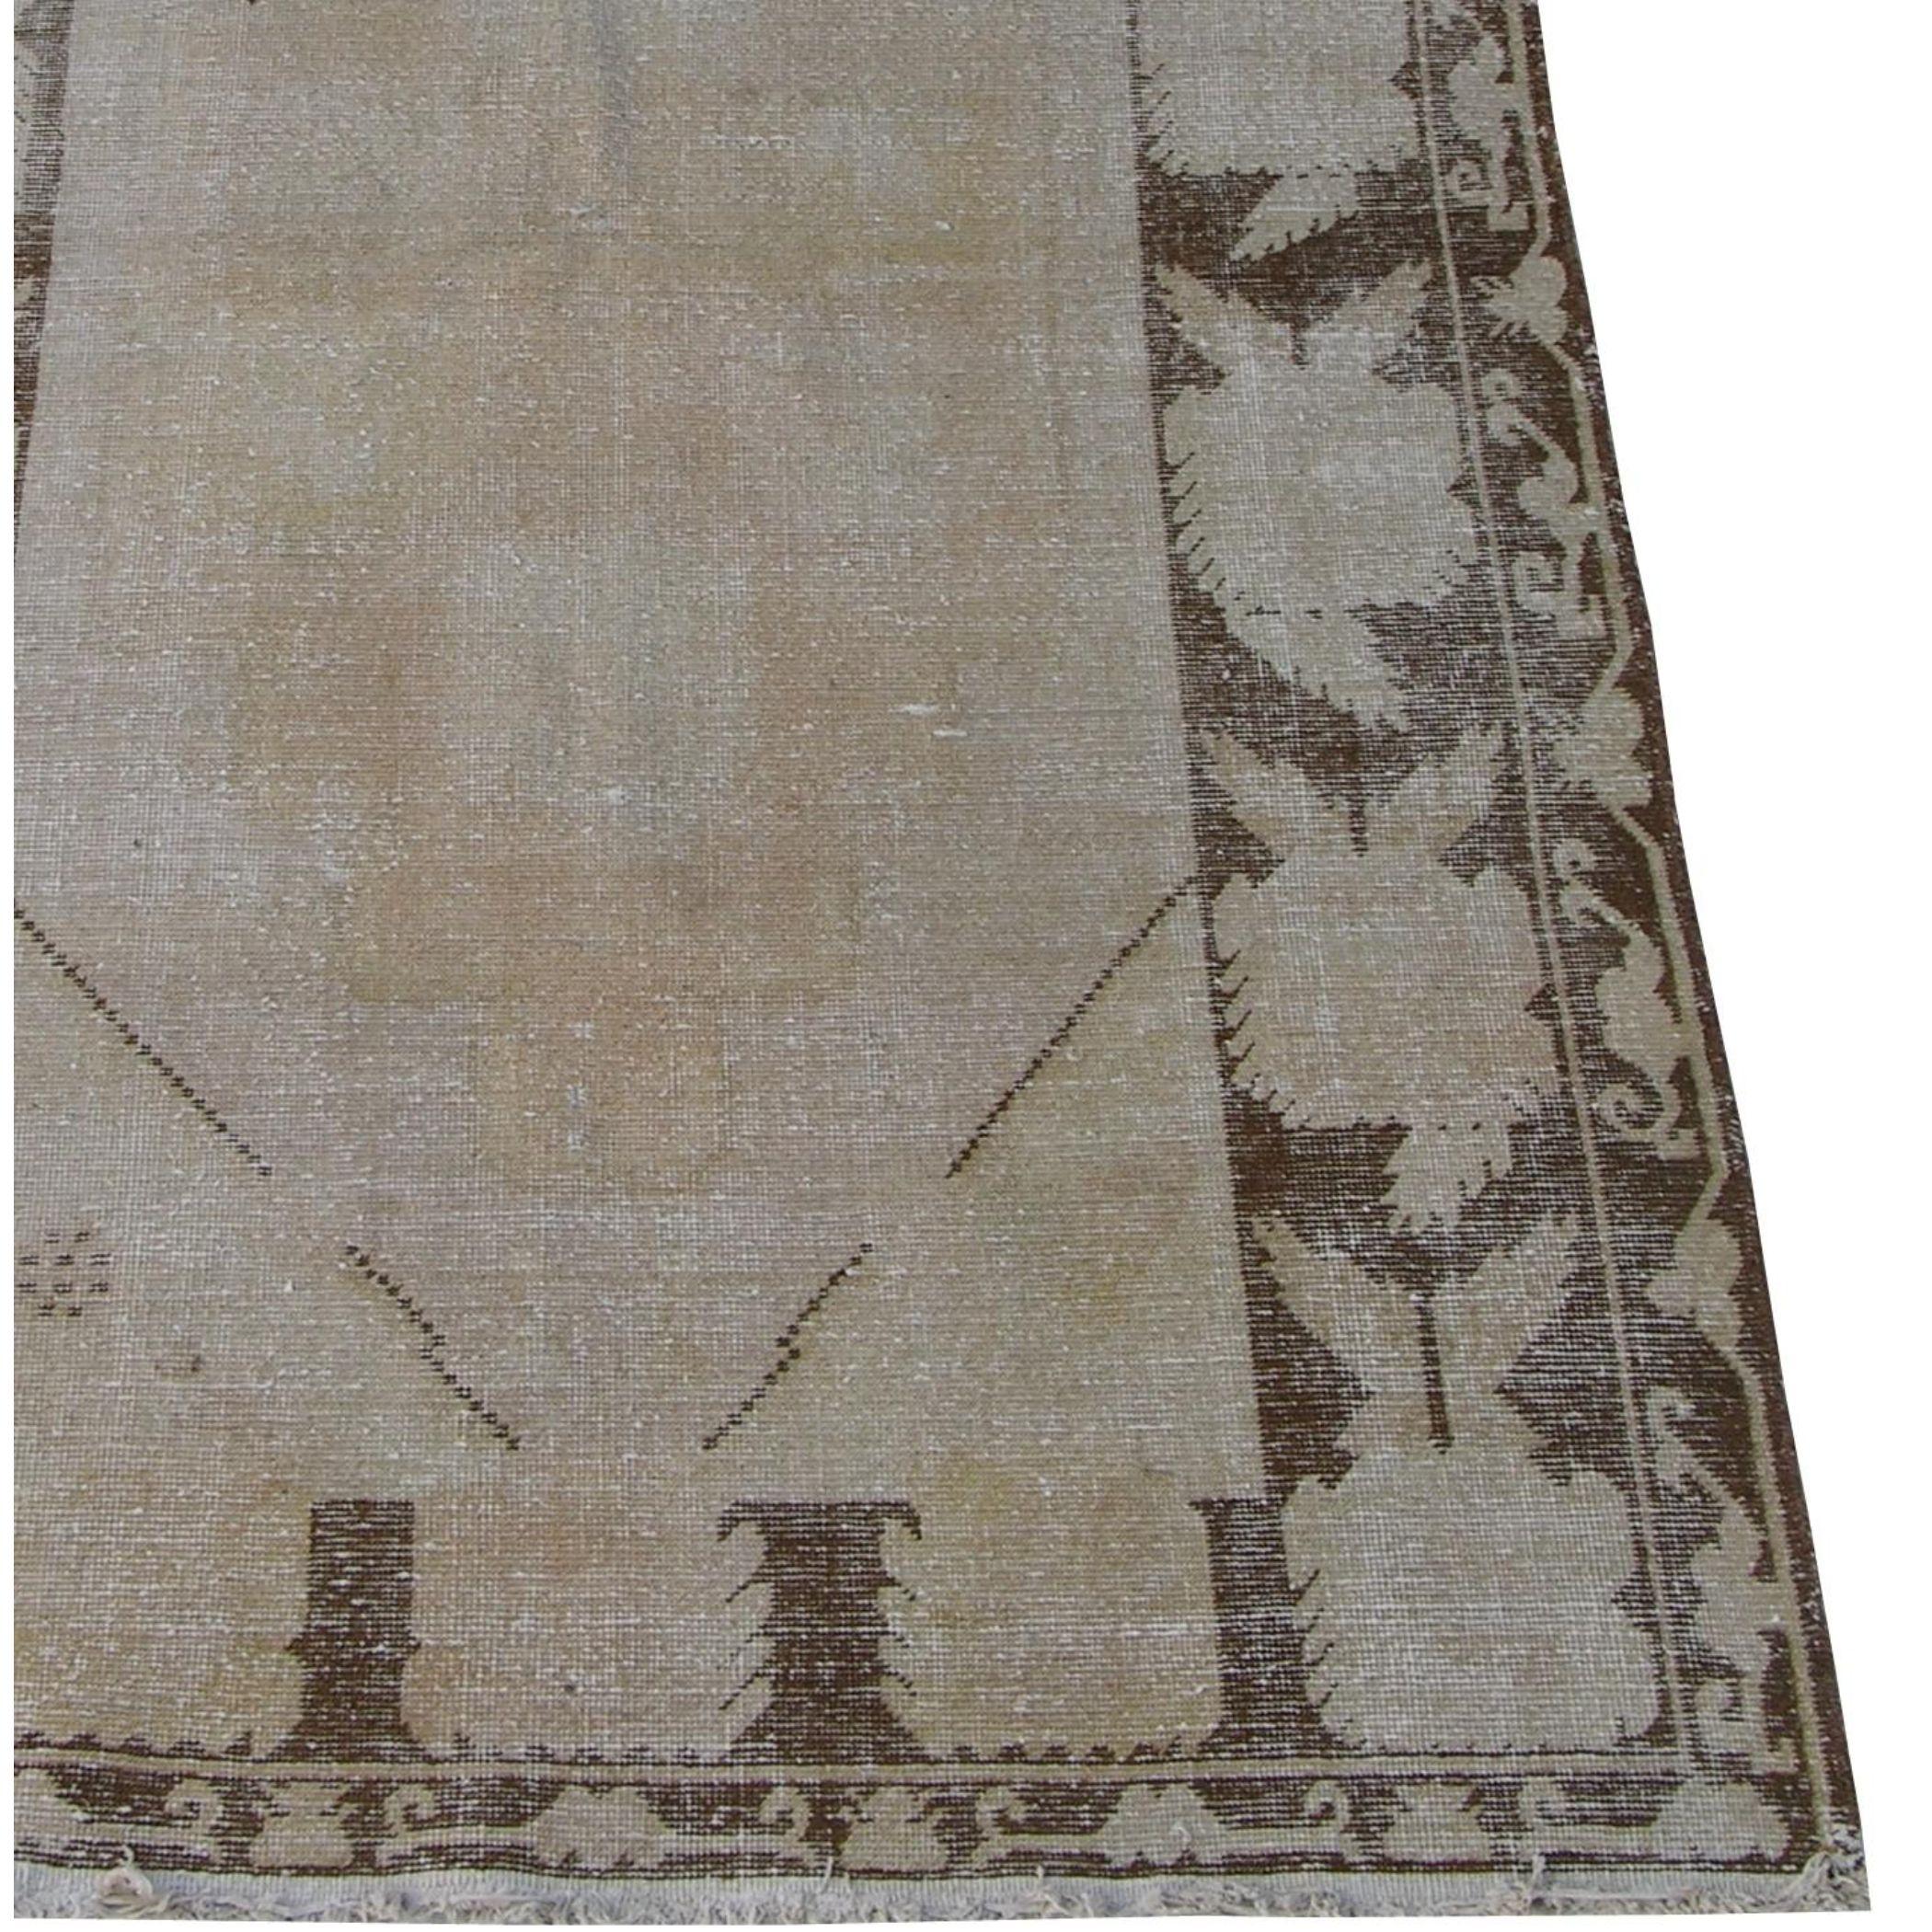 Up for sale is an Early-19th Century Khotan Samarkand Rug